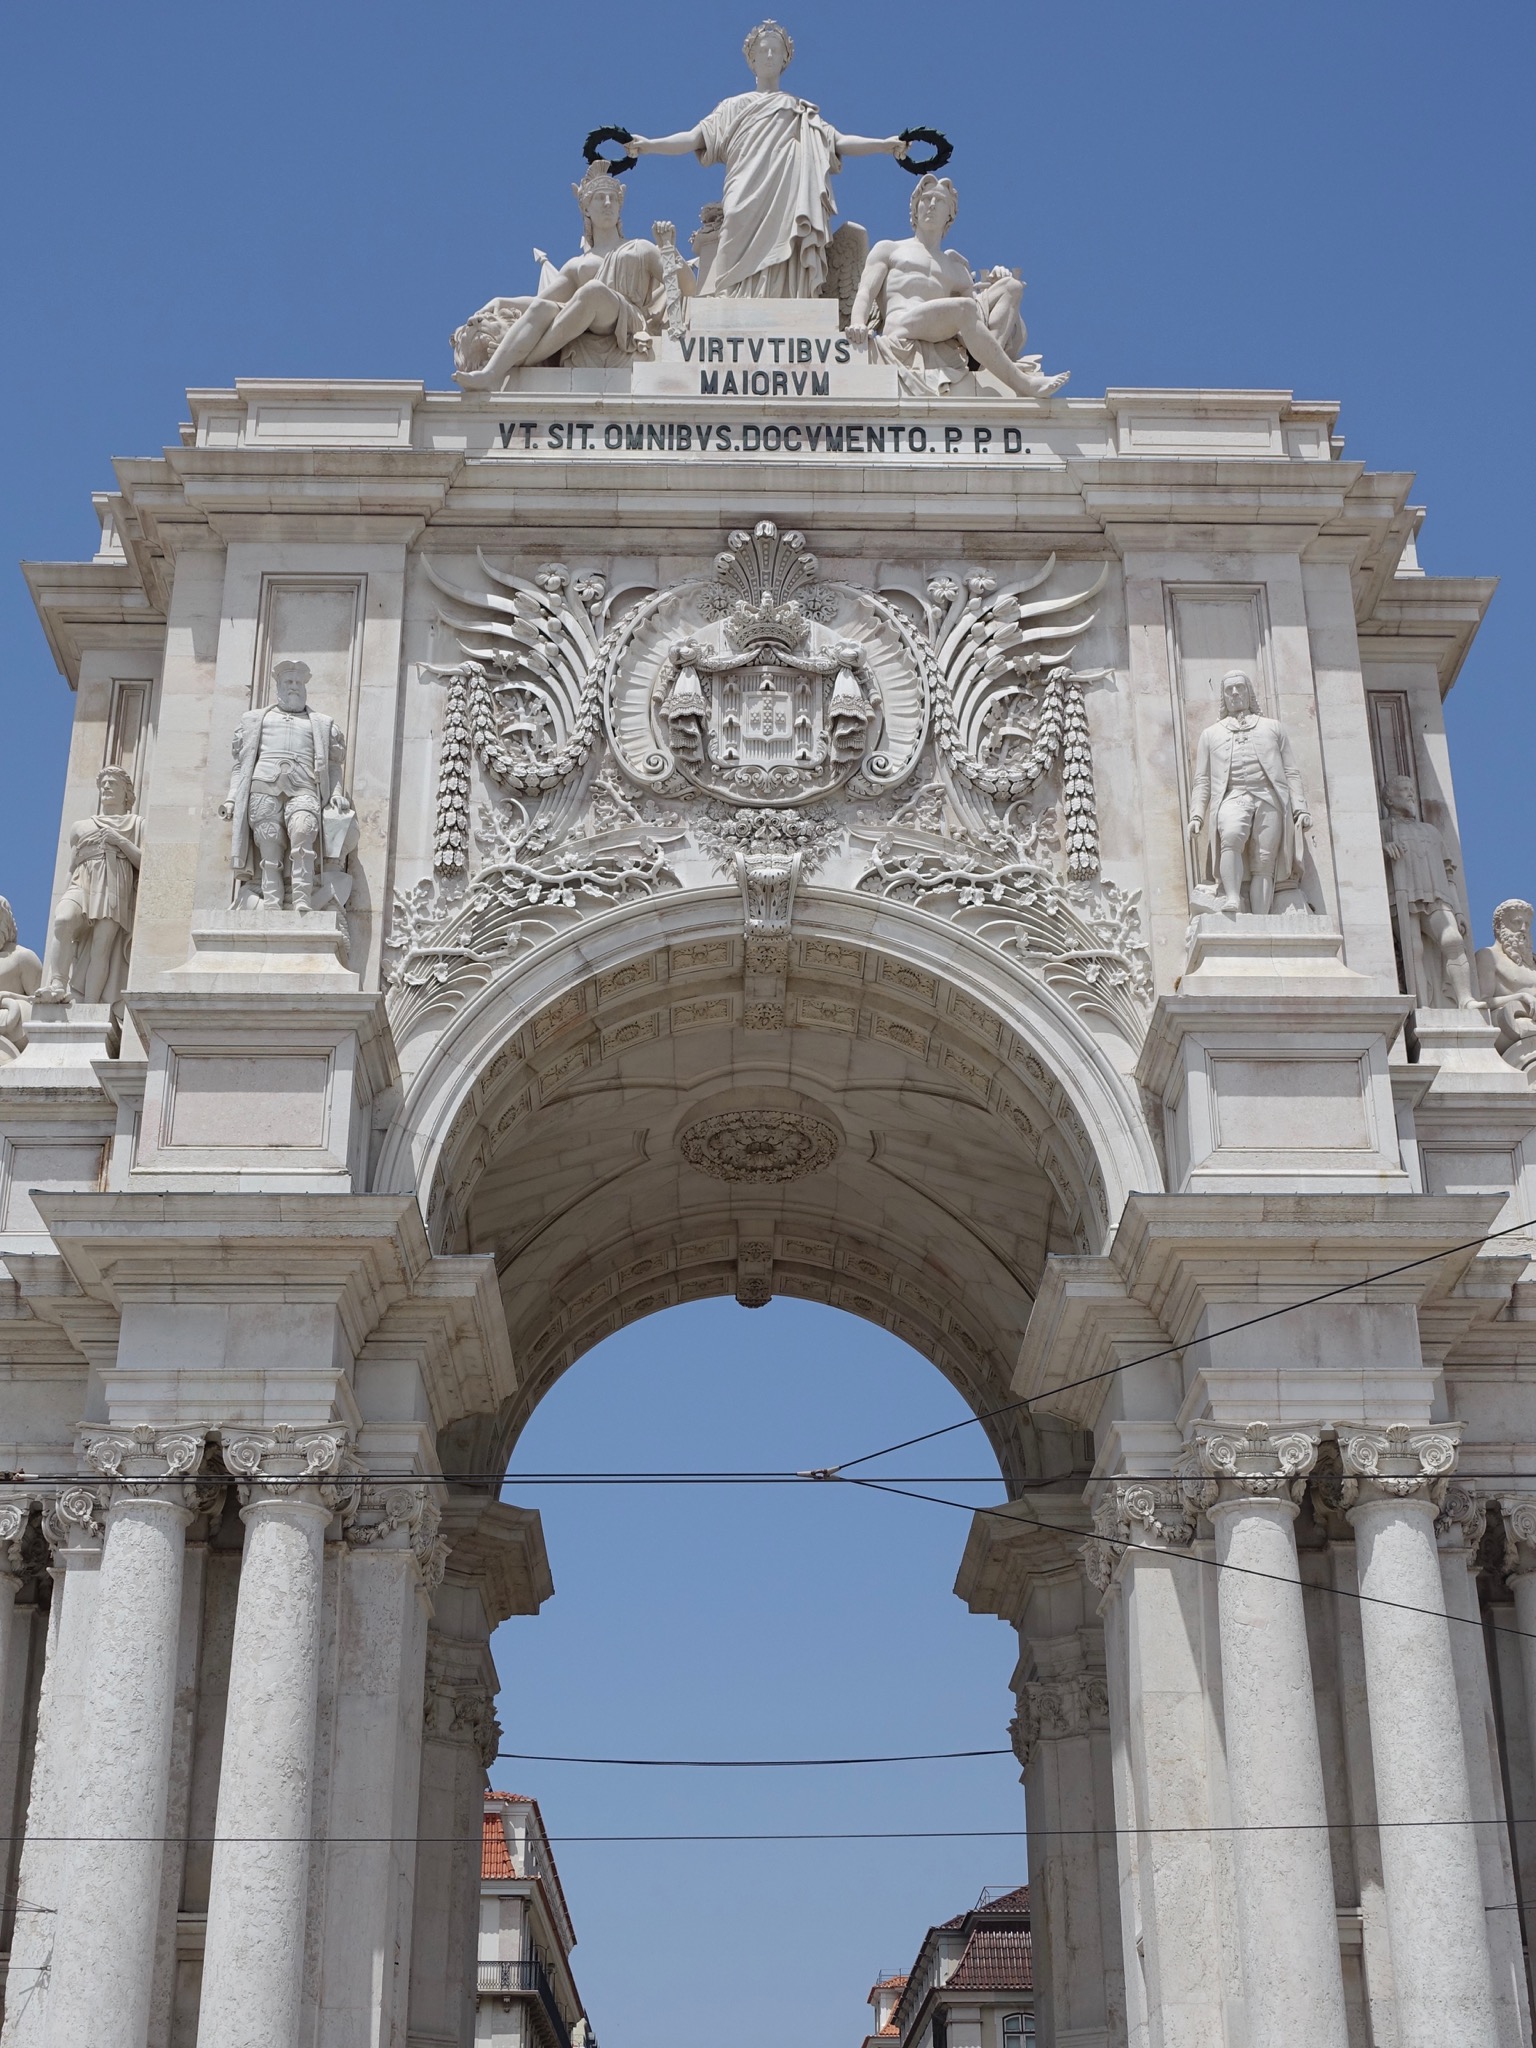 Photo 48 of 86 from the album Highlights Lisbon 2015.